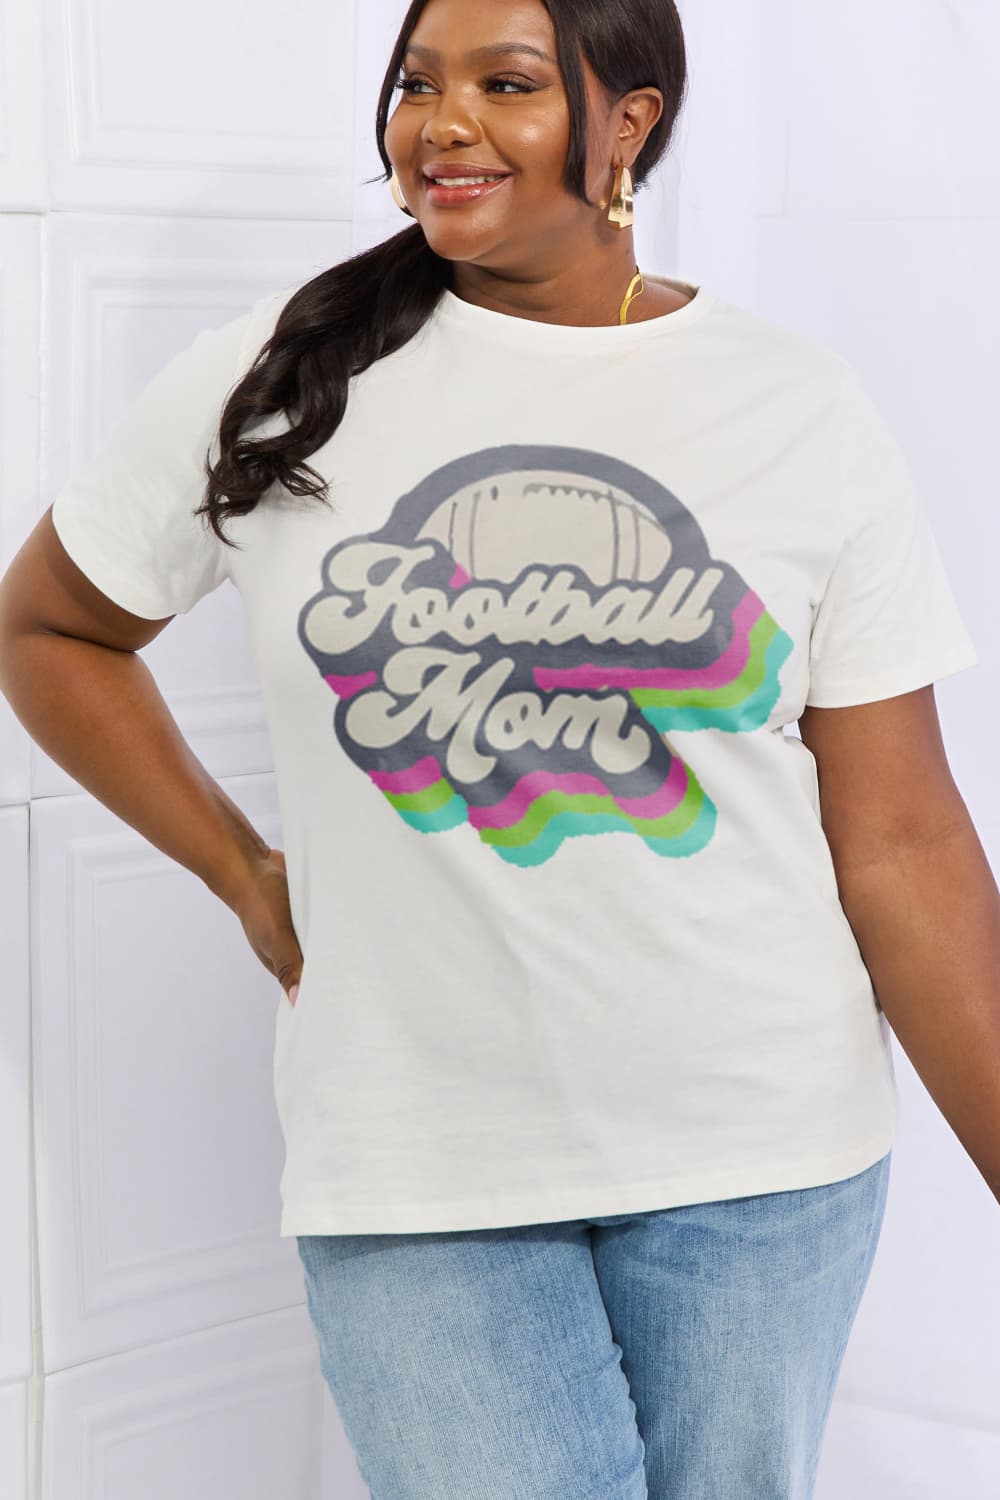 Simply Love Full Size FOOTBALL MOM Graphic Cotton Tee - Scarlett's Riverside Boutique 